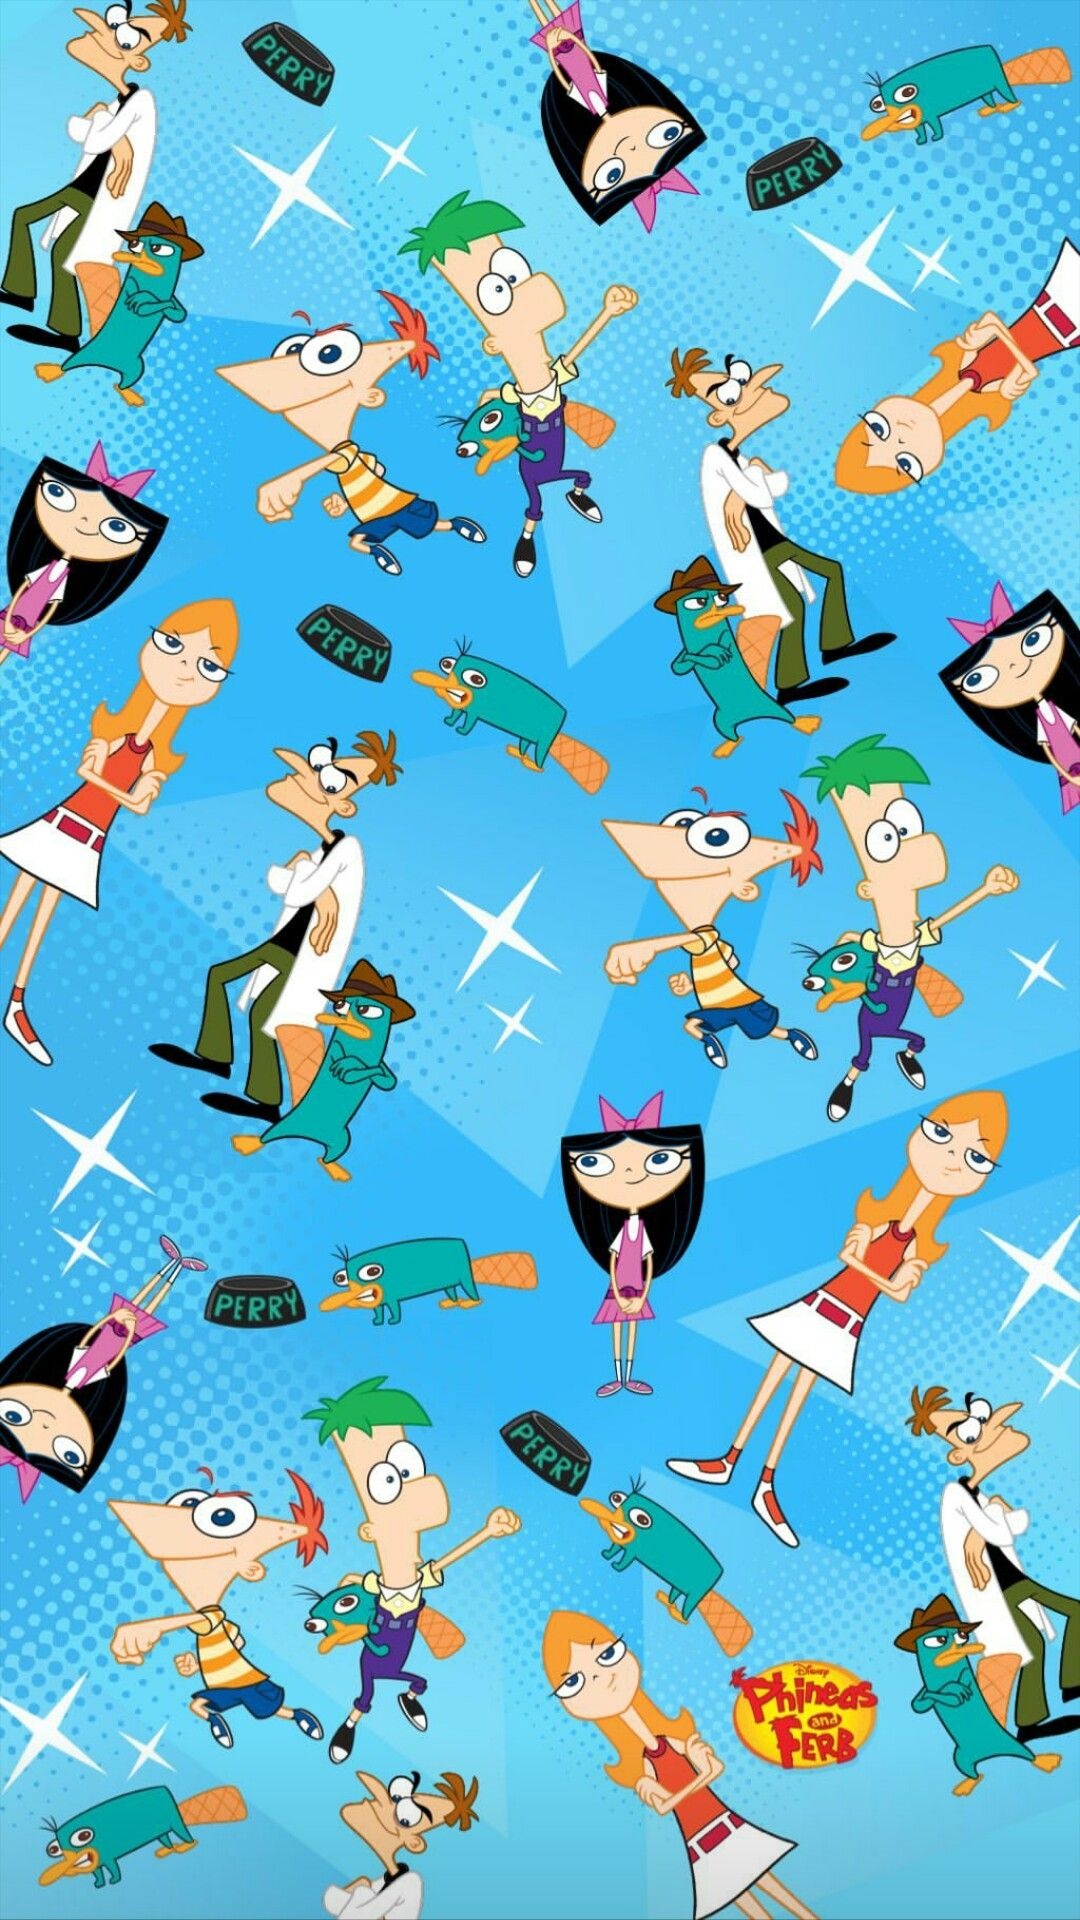 Disney wallpapers, Phineas and Ferb, Cartoon wallpaper, iPhone, 1080x1920 Full HD Phone